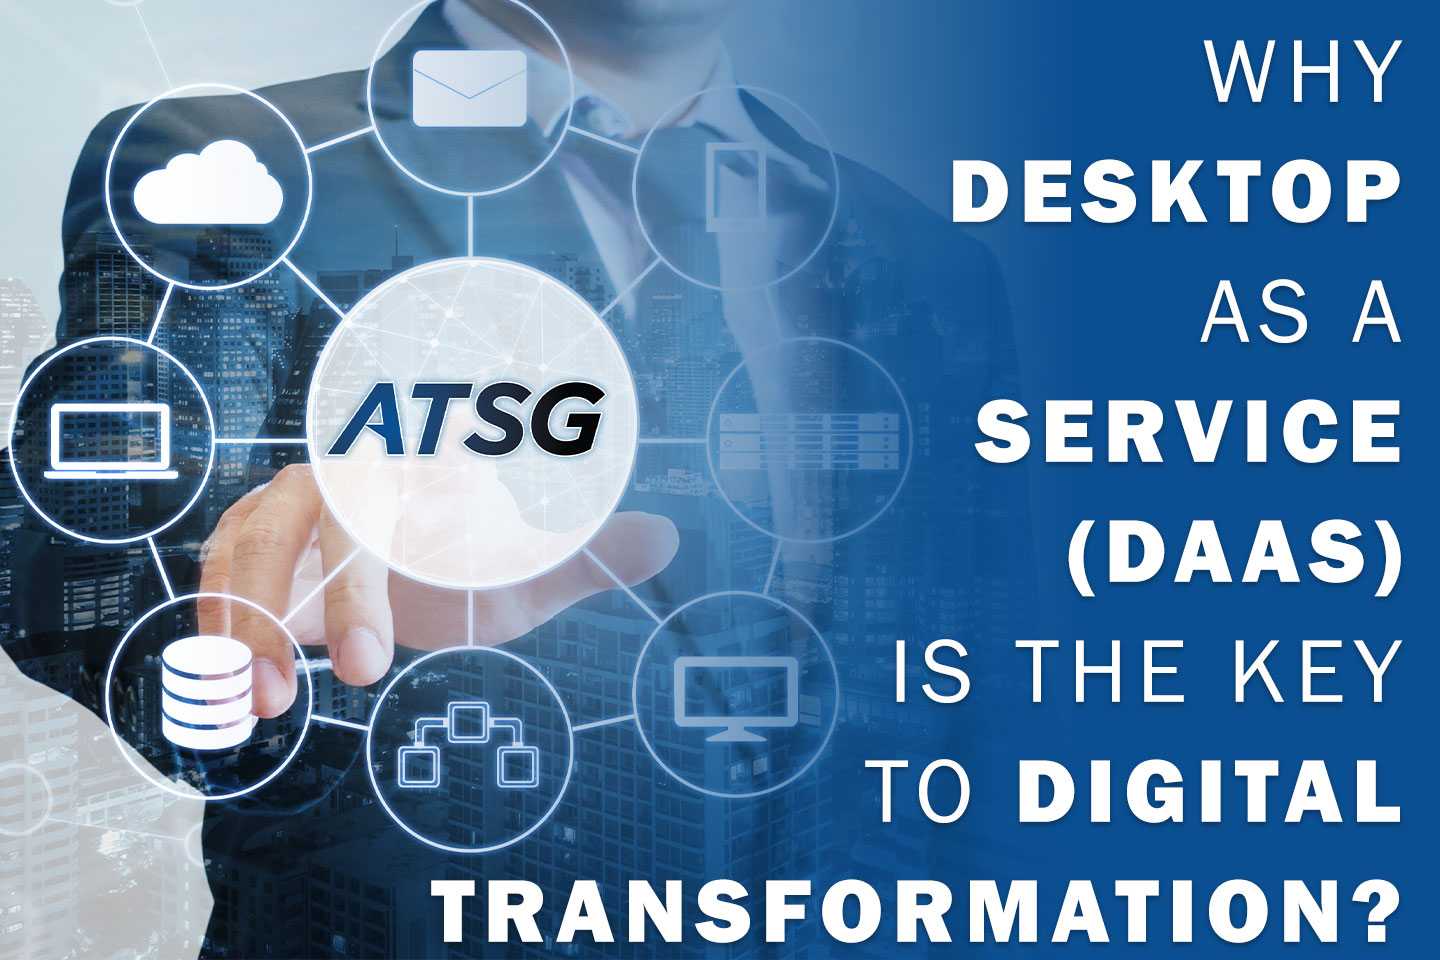 Why Desktop as a Service (DaaS) is the Key to Digital Transformation?